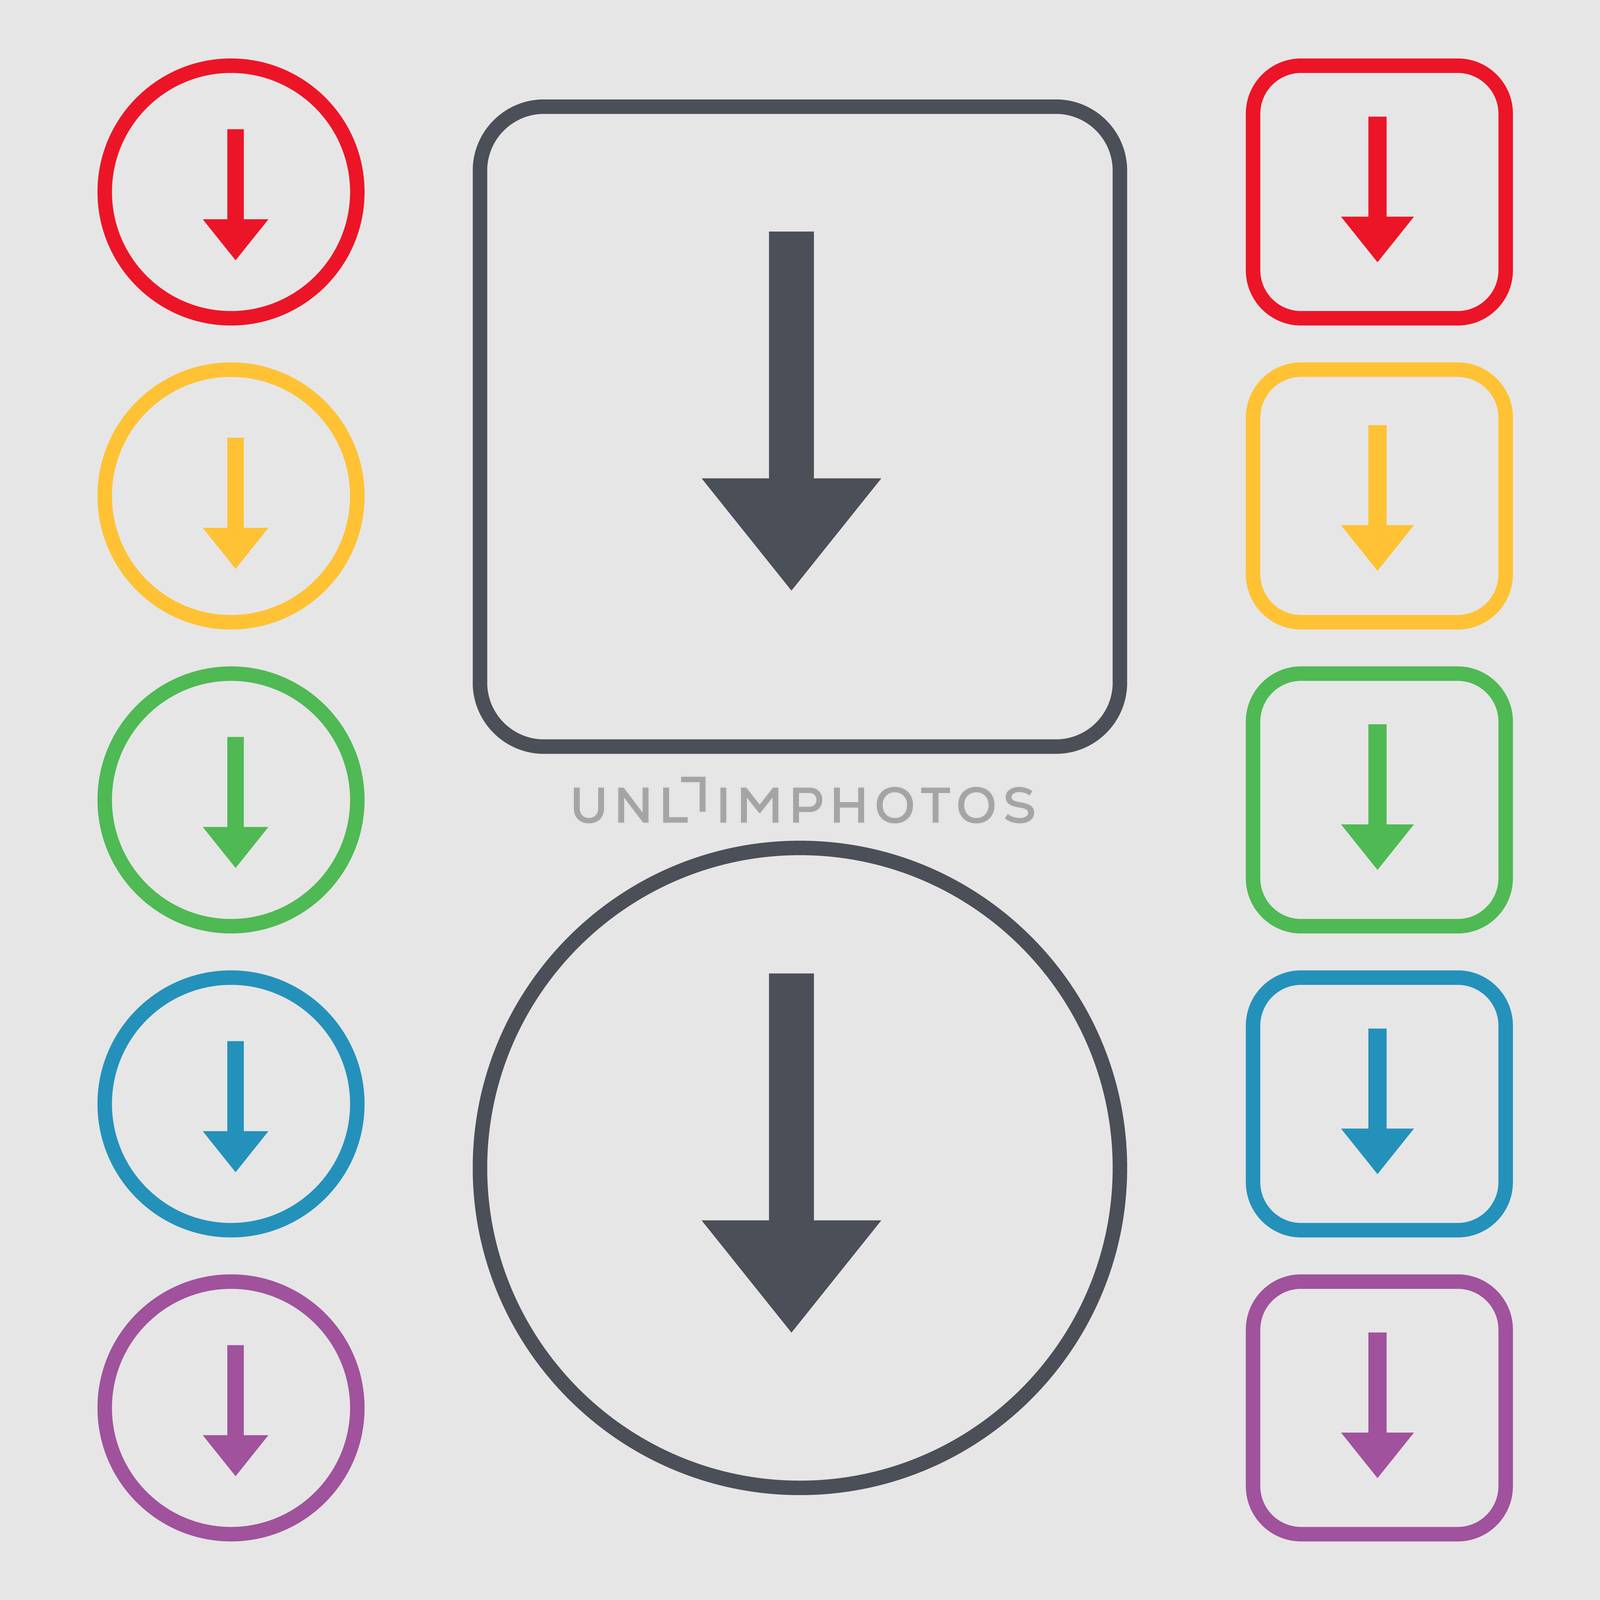 Arrow down, Download, Load, Backup icon sign. symbol on the Round and square buttons with frame. illustration